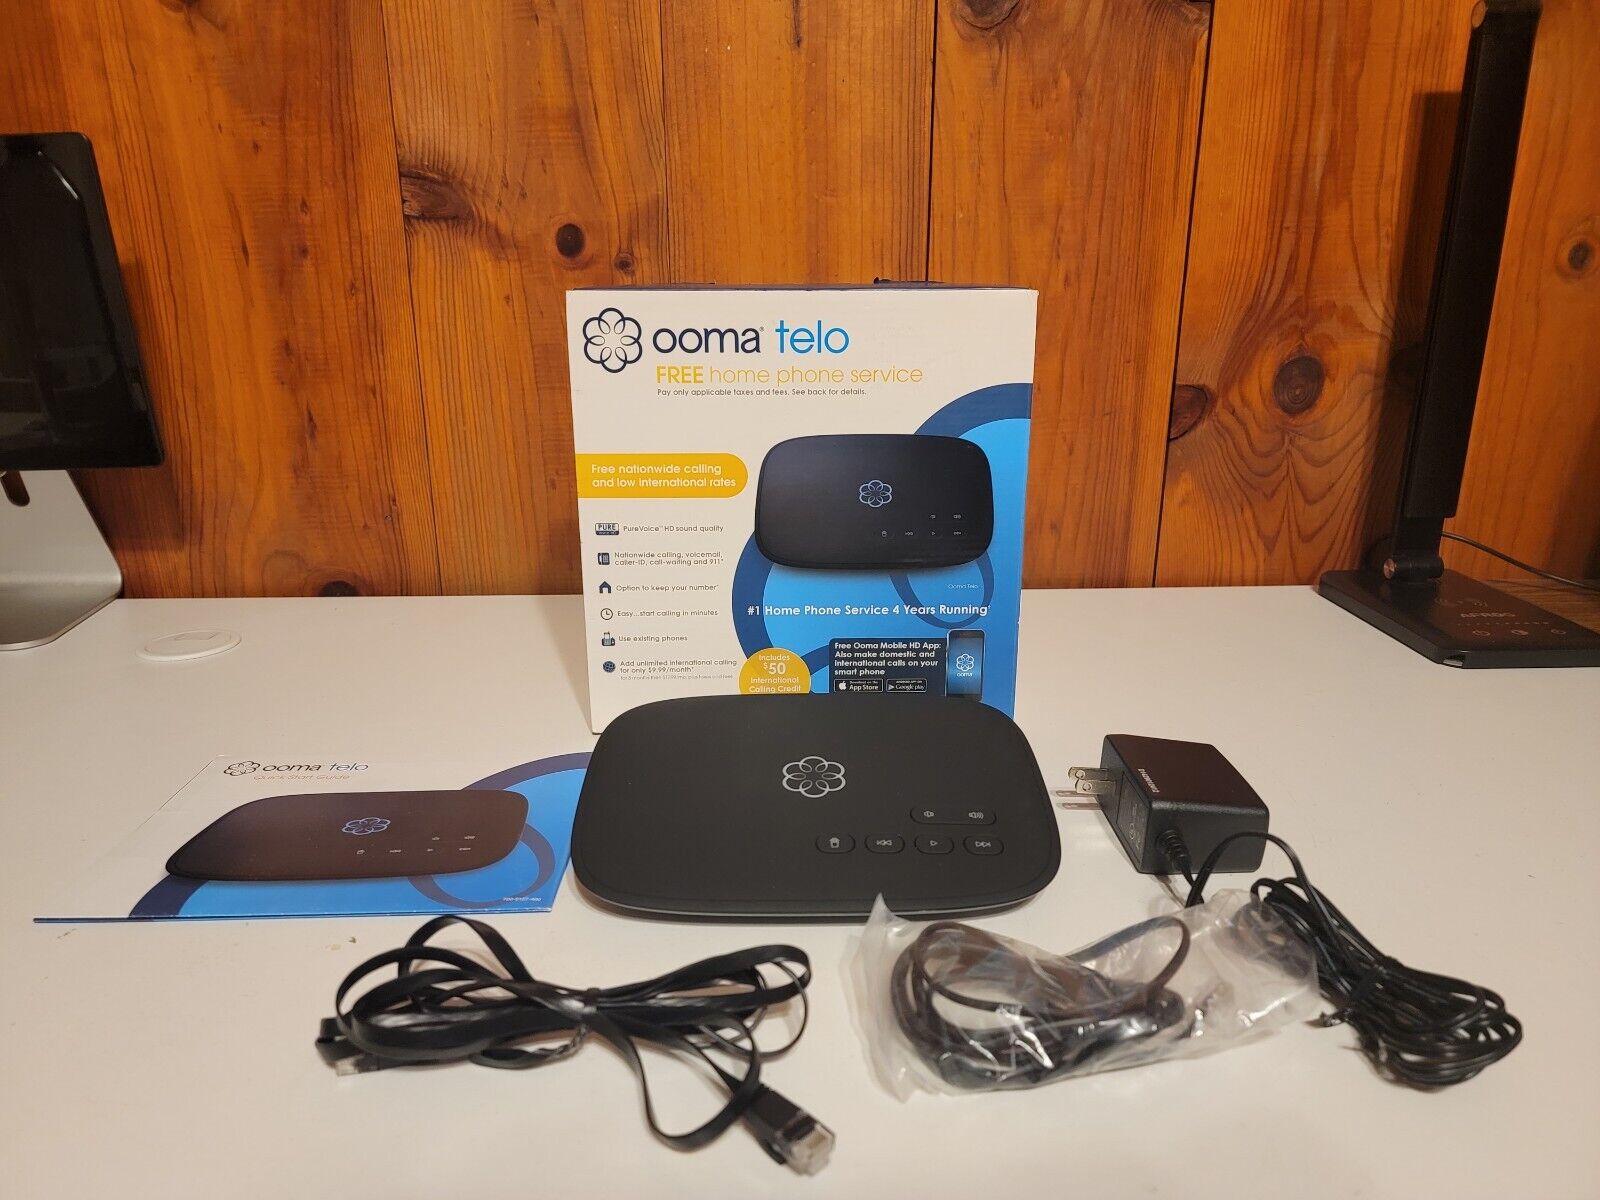 NEW - Ooma Telo VoIP Home Phone Service - DG0790